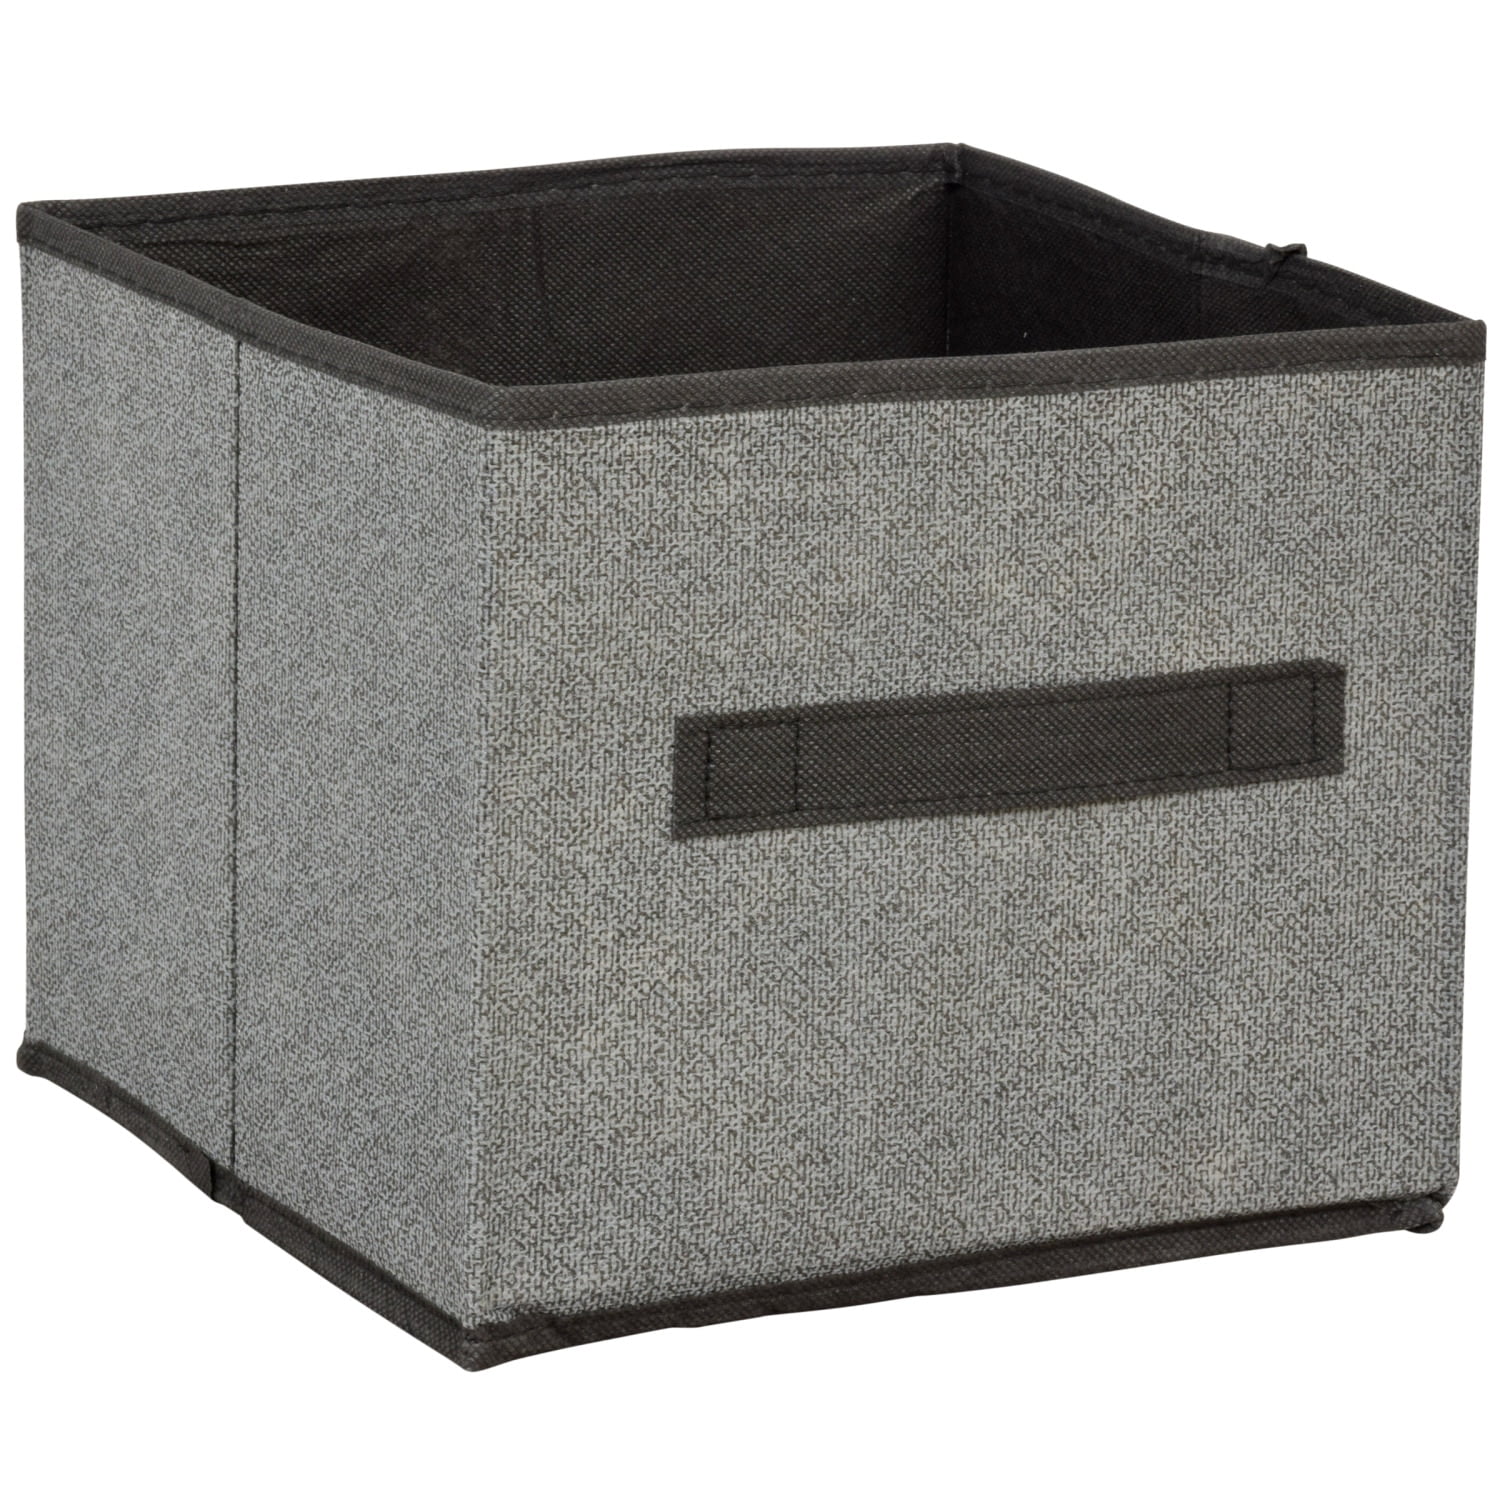 Set of 4 Black and Gray Collapsible Storage Cube Bins 9"x9"x8" FREE SHIPPING 